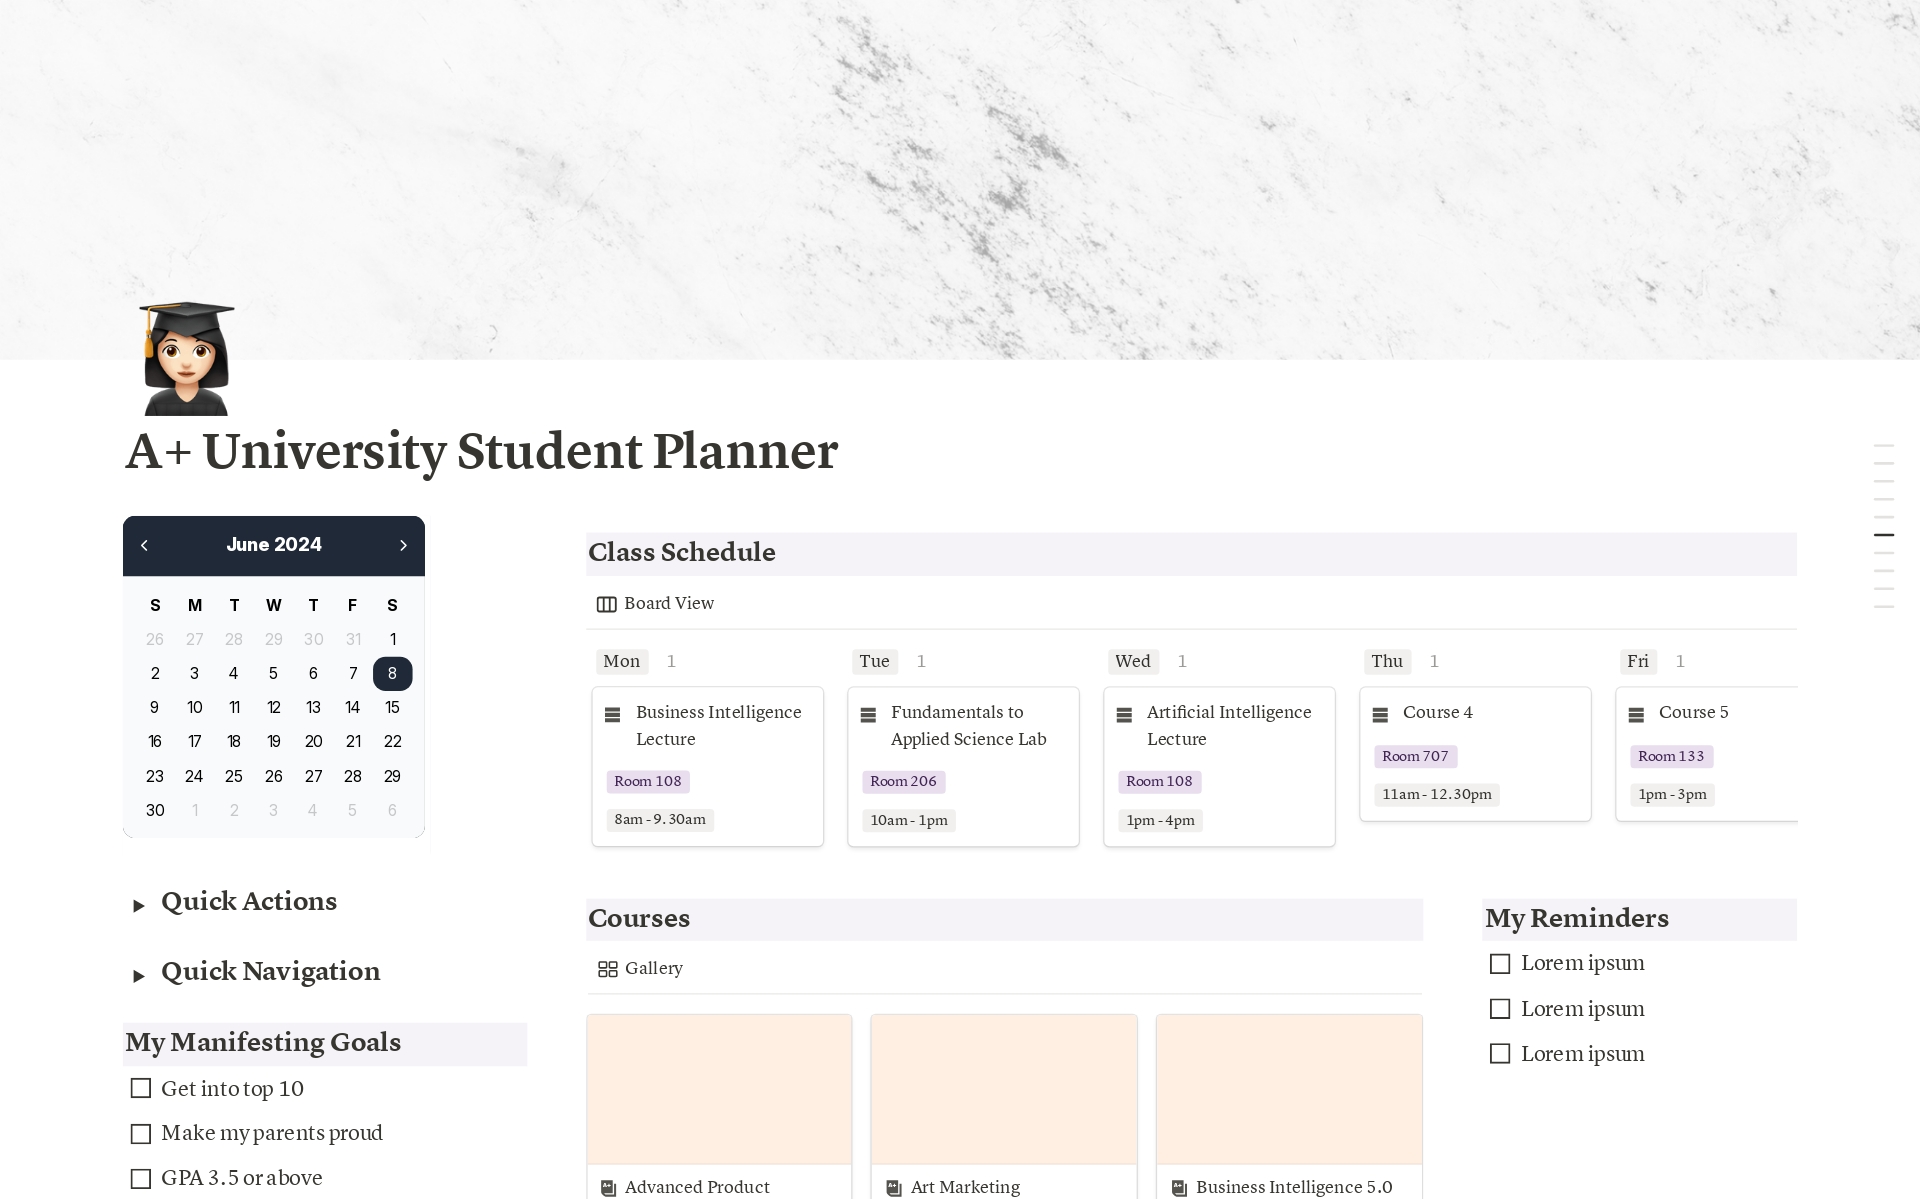 Ace your semesters in a smarter way. This pre-made template is built to kickstart and booost your academic performance